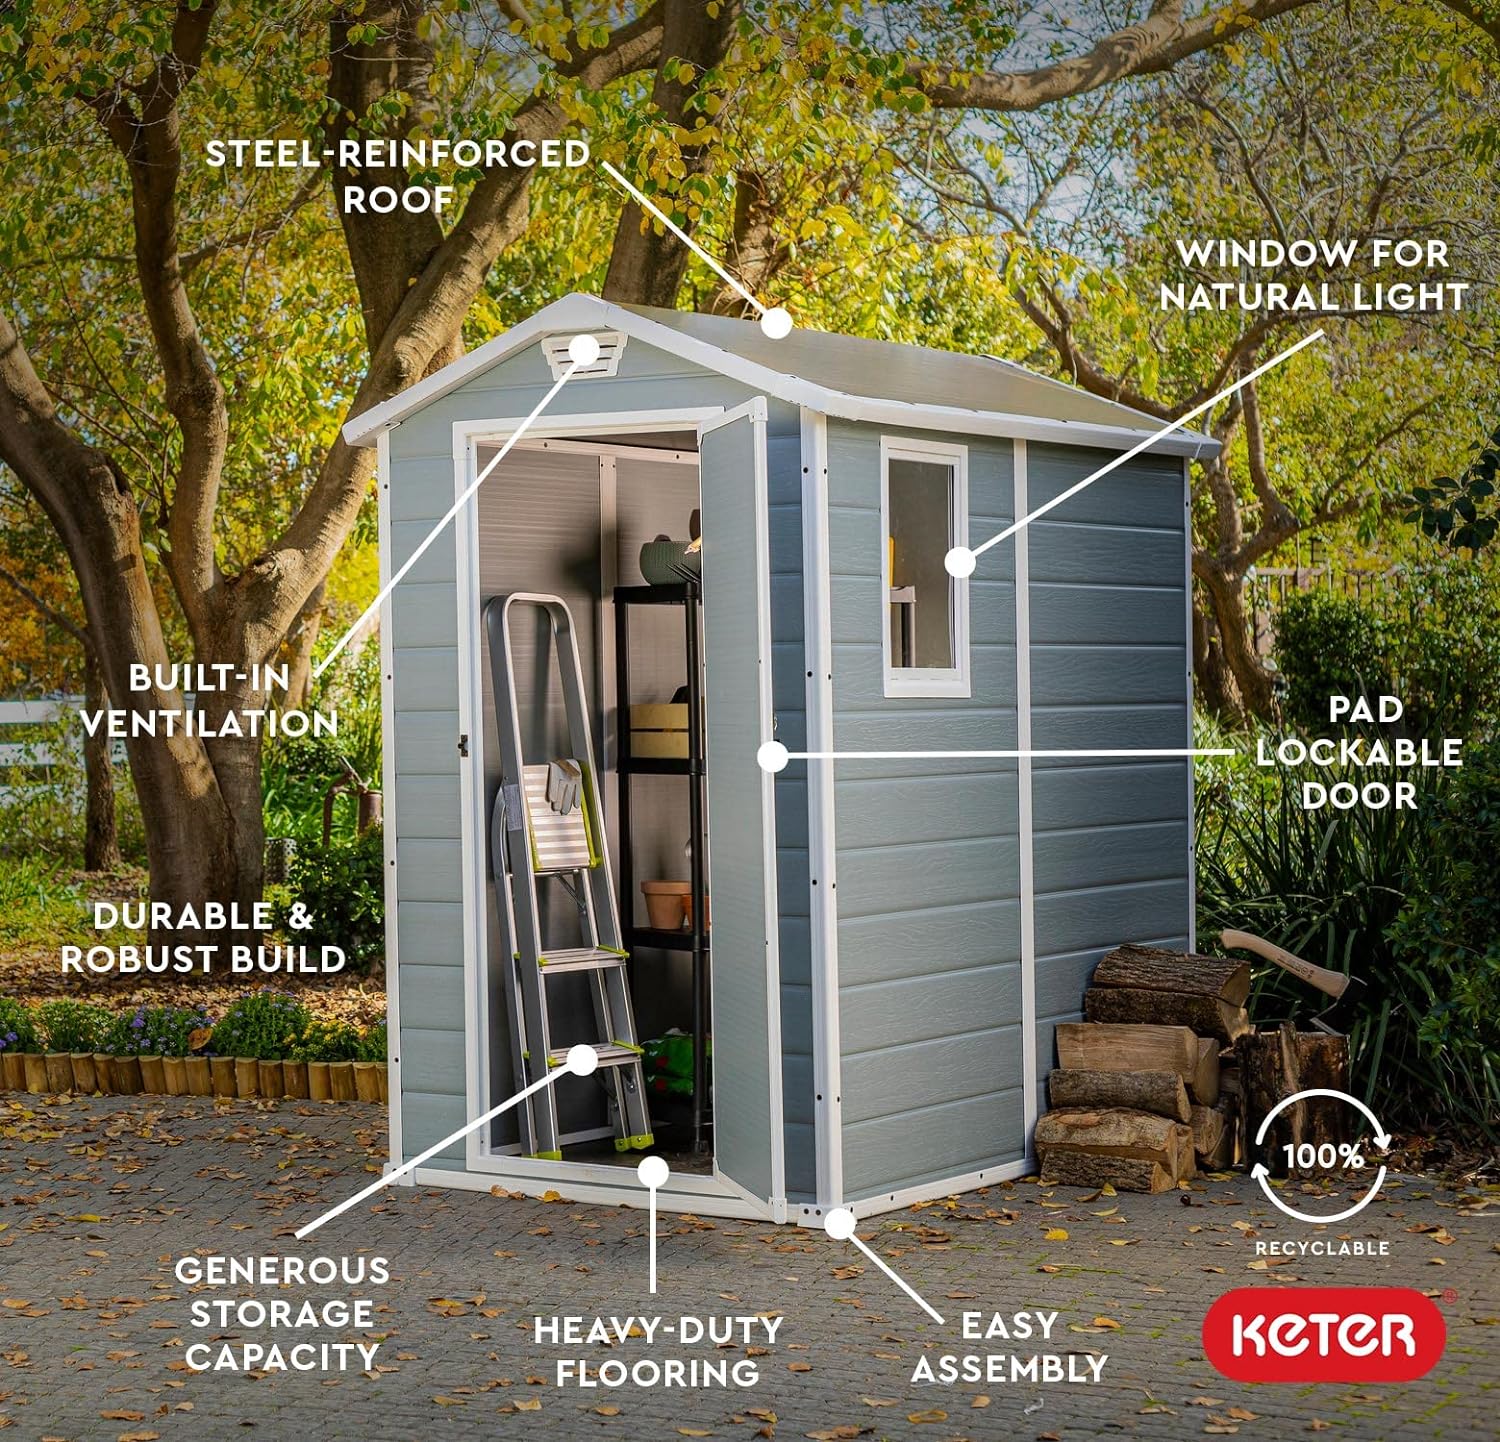 Keter Manor 4x6 Storage Shed features